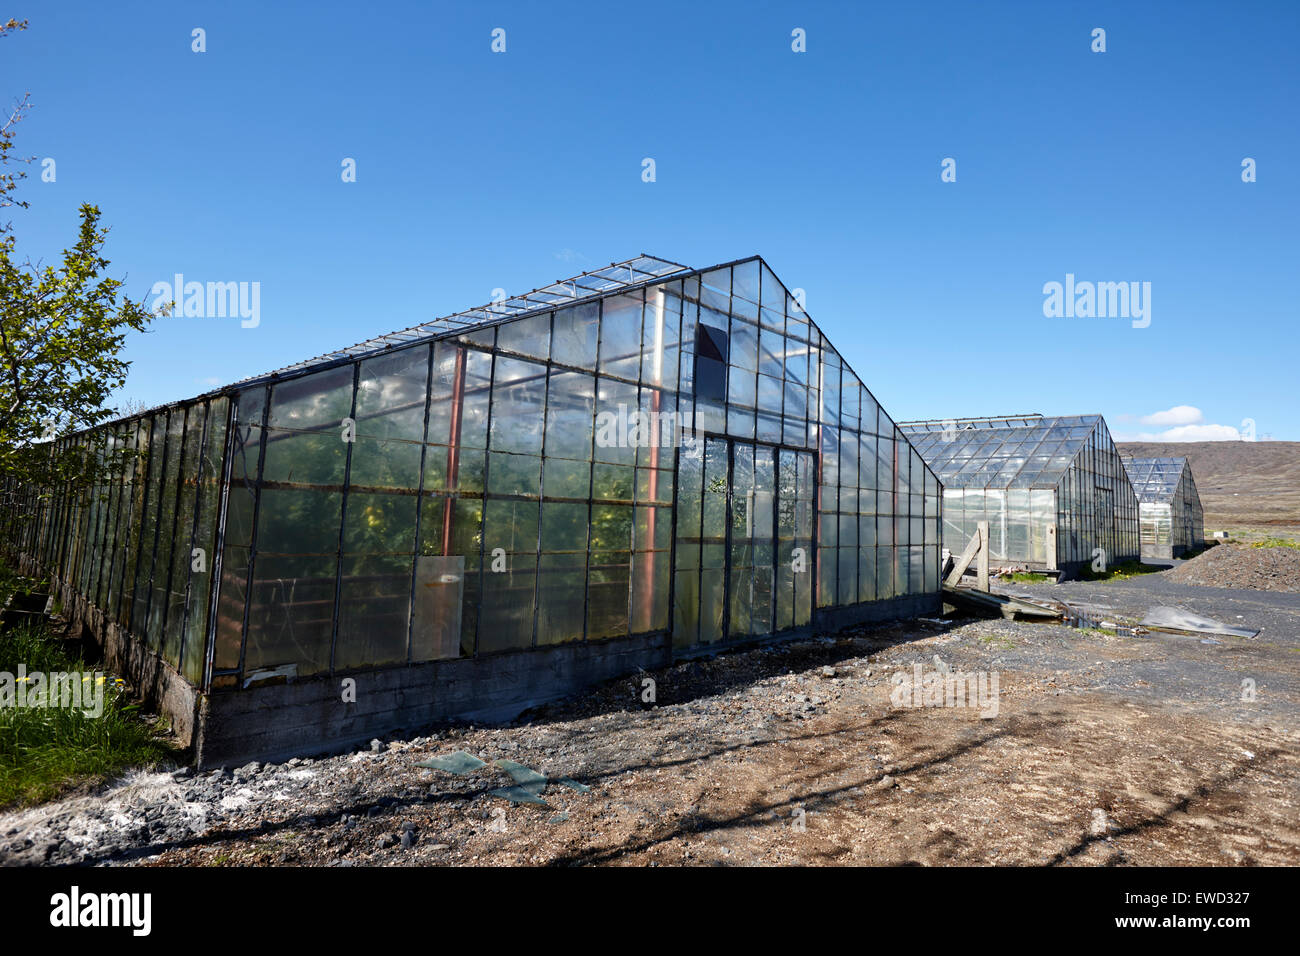 greenhouses heated by geothermal energy for growing tomatoes Hveragerdi iceland Stock Photo